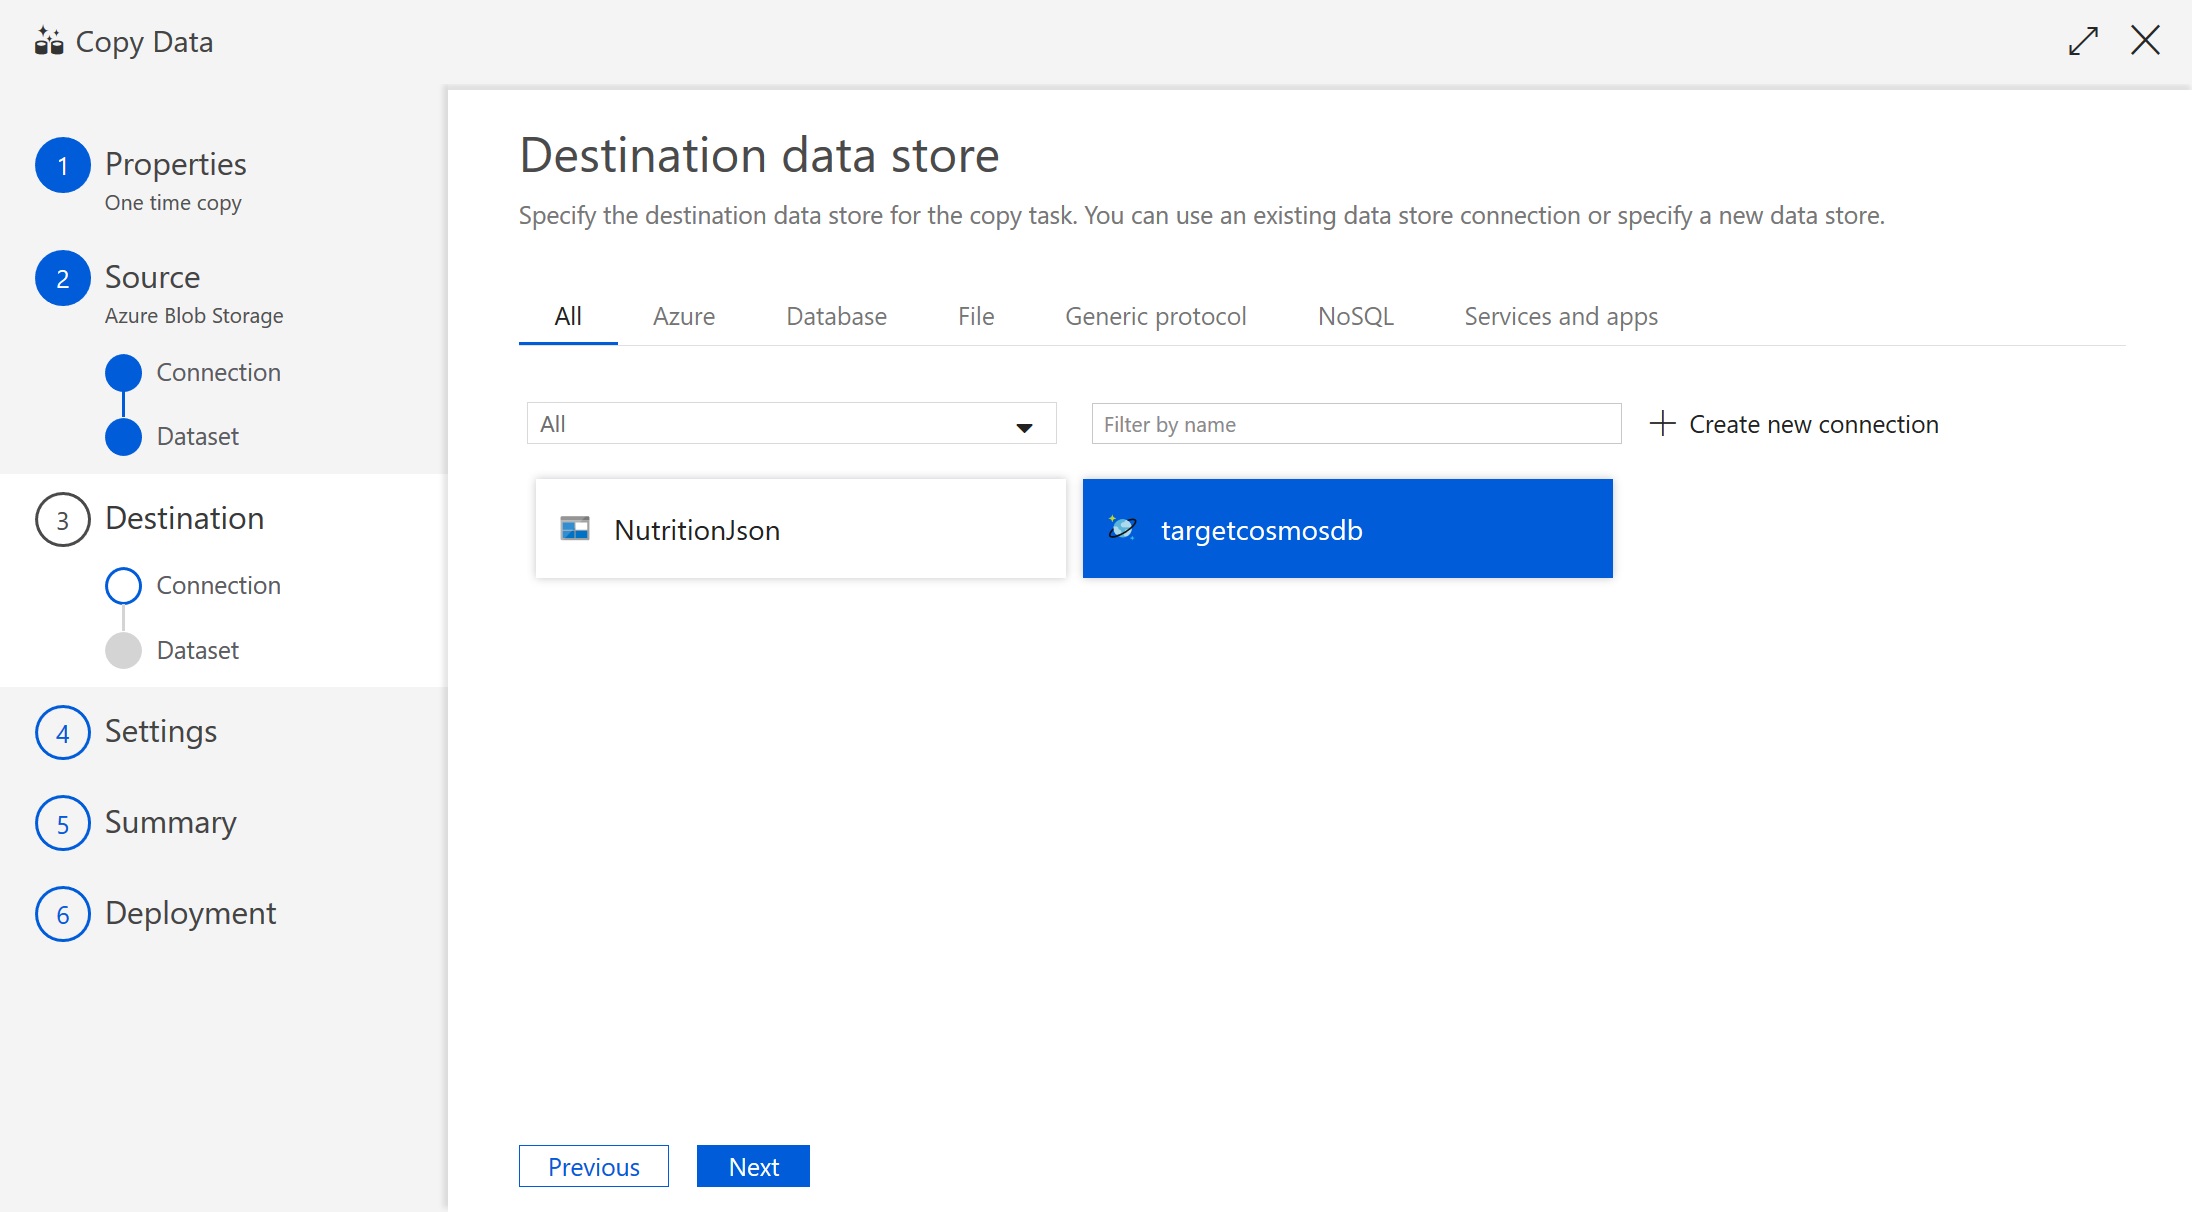 "The destination data source dialog is displayed"